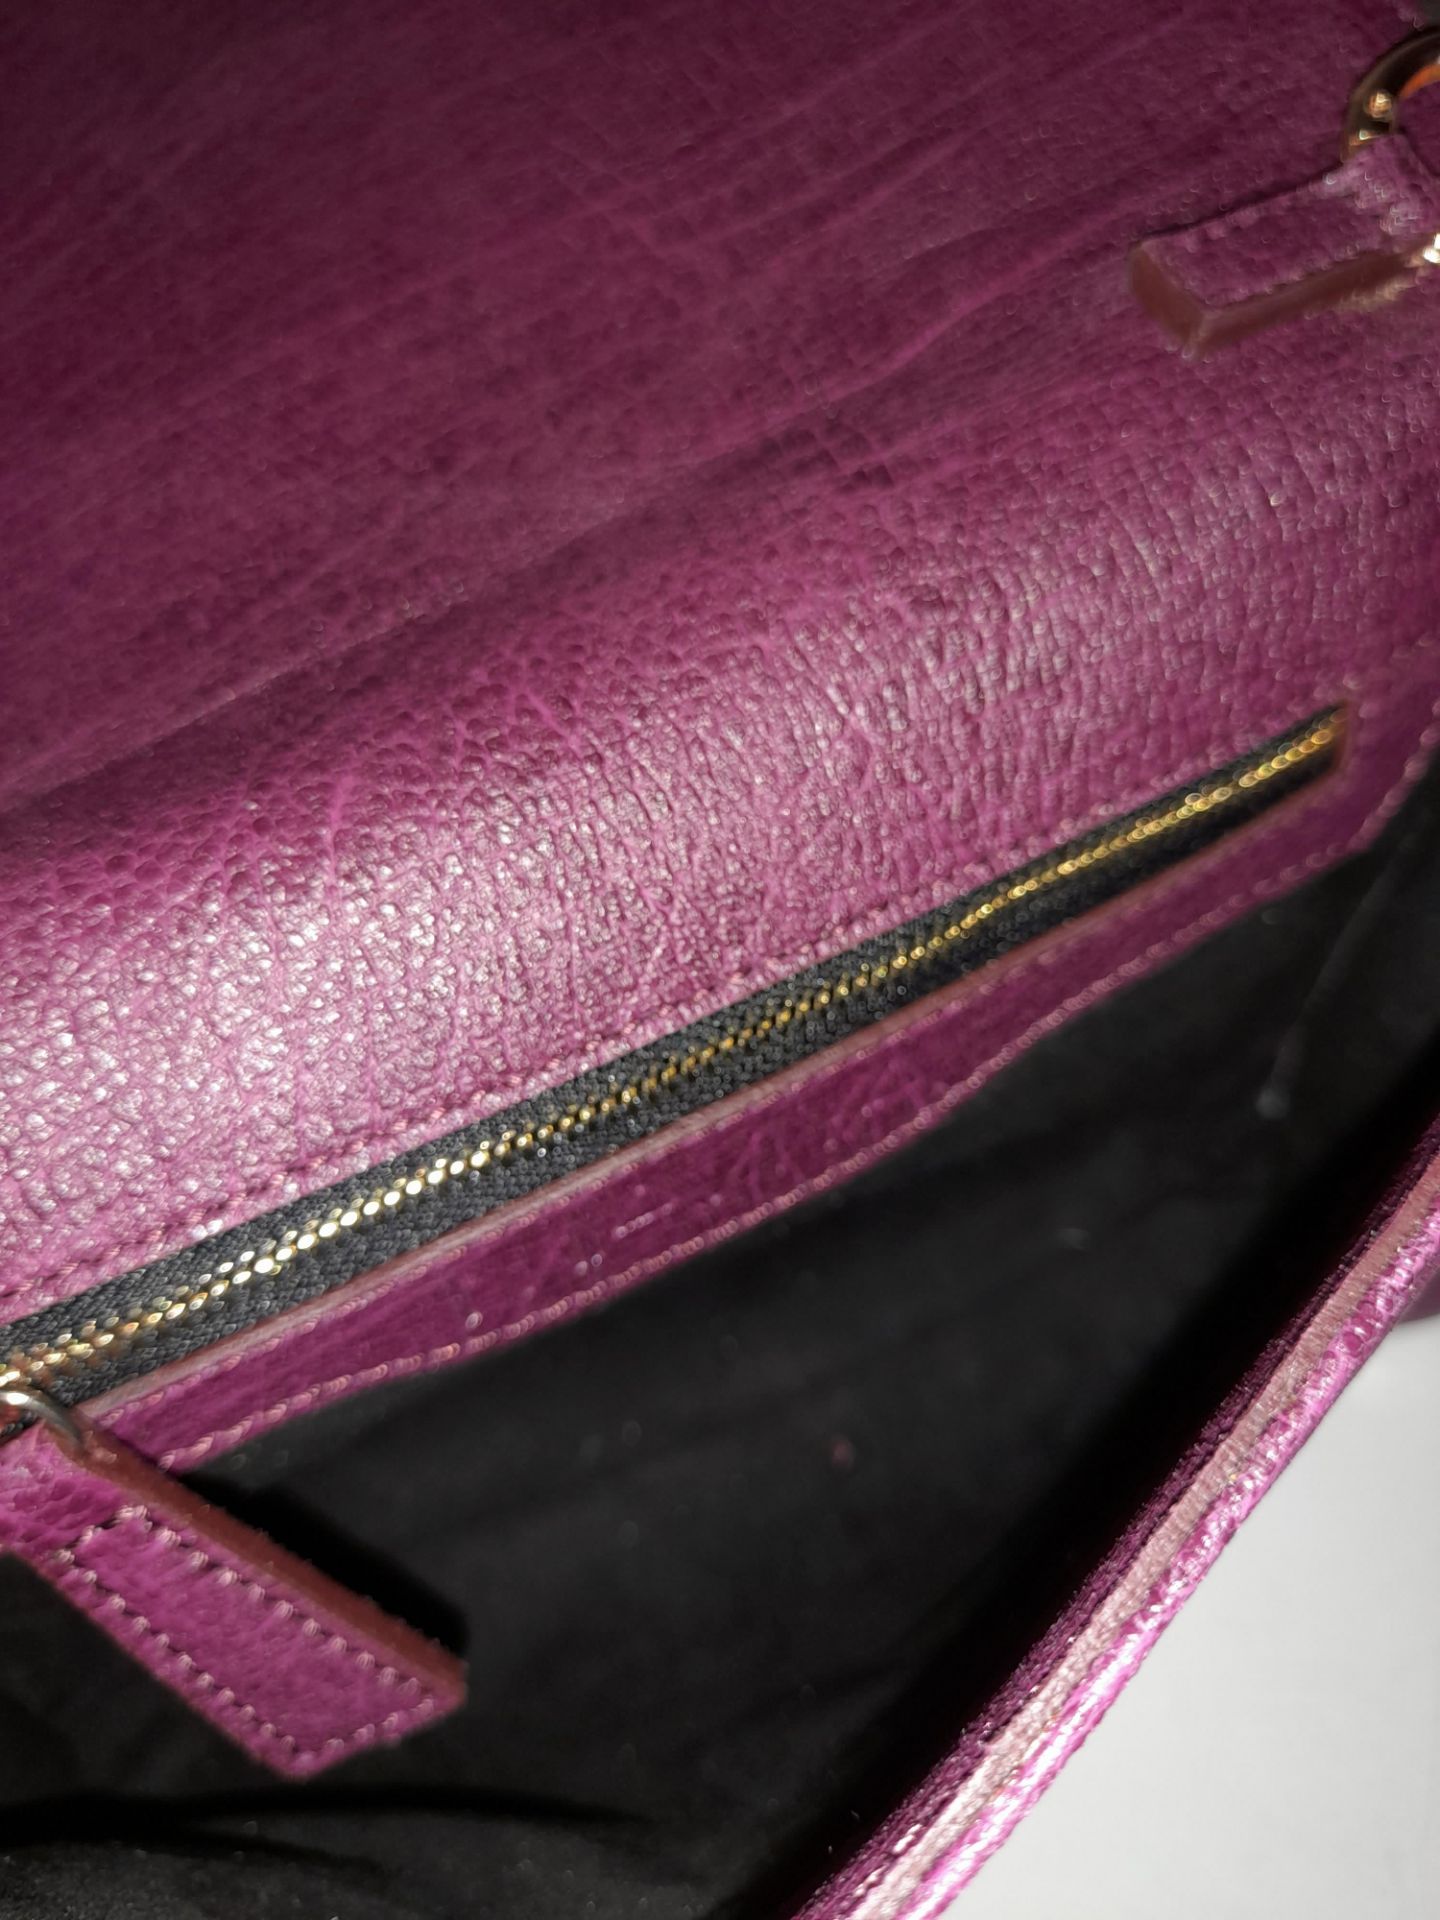 Maviya “Mannie” Purple Vegan Italian Leather Evening Clutch Bag with Grained Finish, Faux Suede - Image 3 of 3